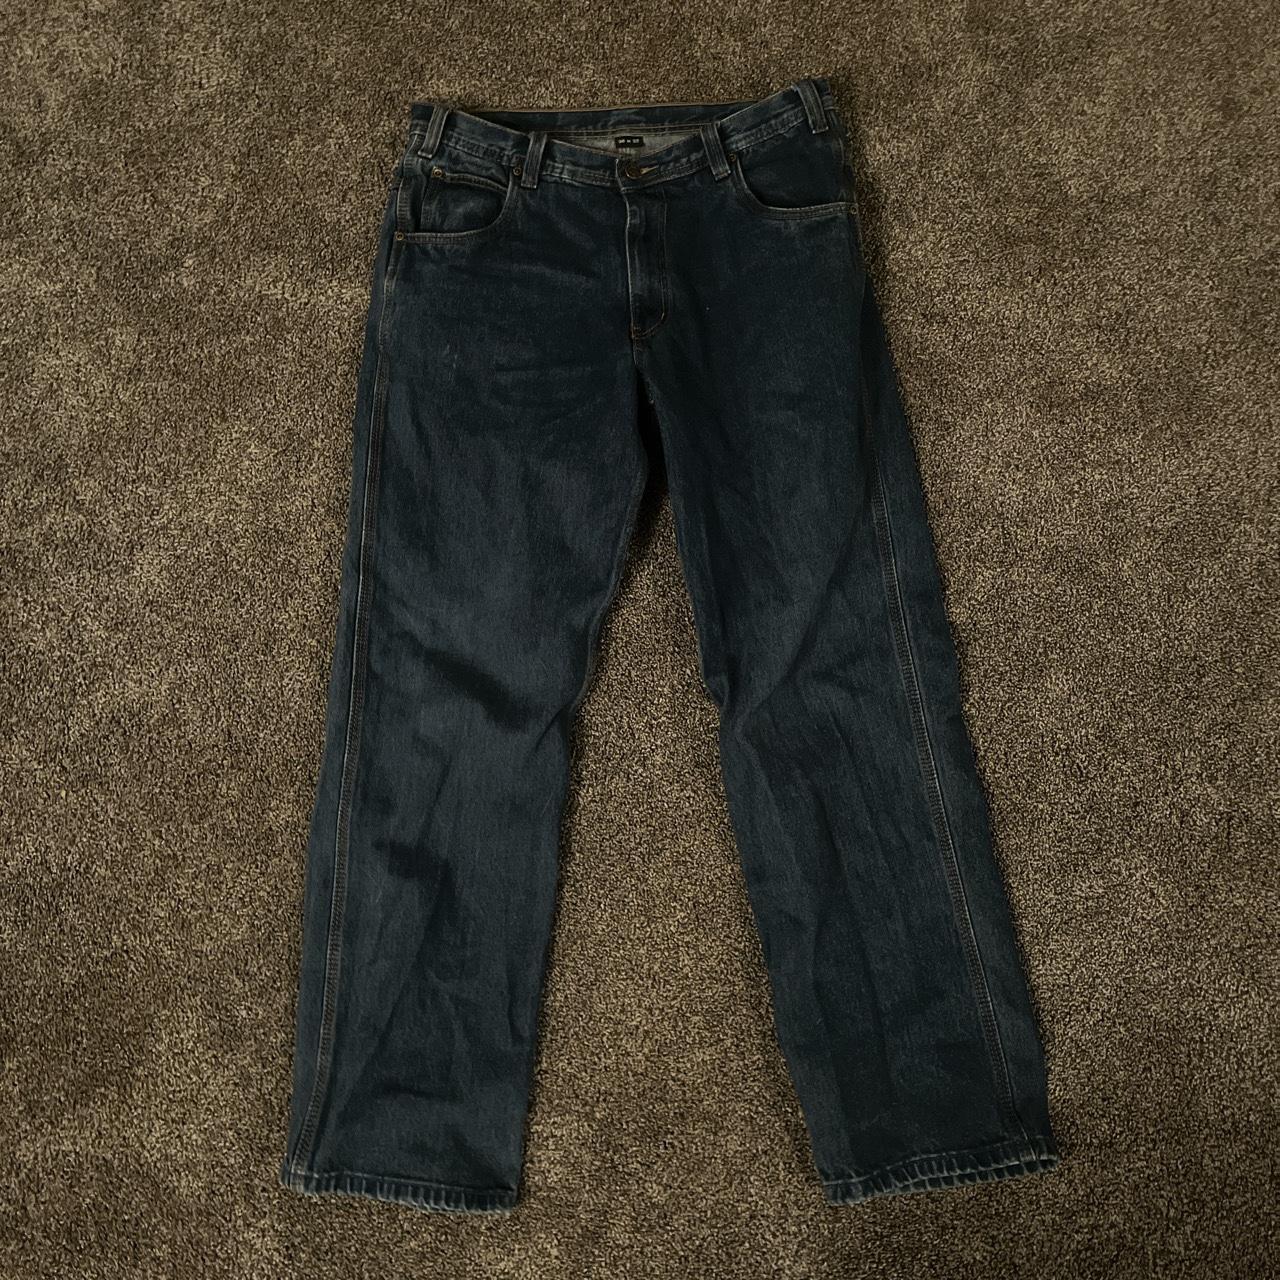 Most wanted baggy jeans Good fit no flaws Skater... - Depop